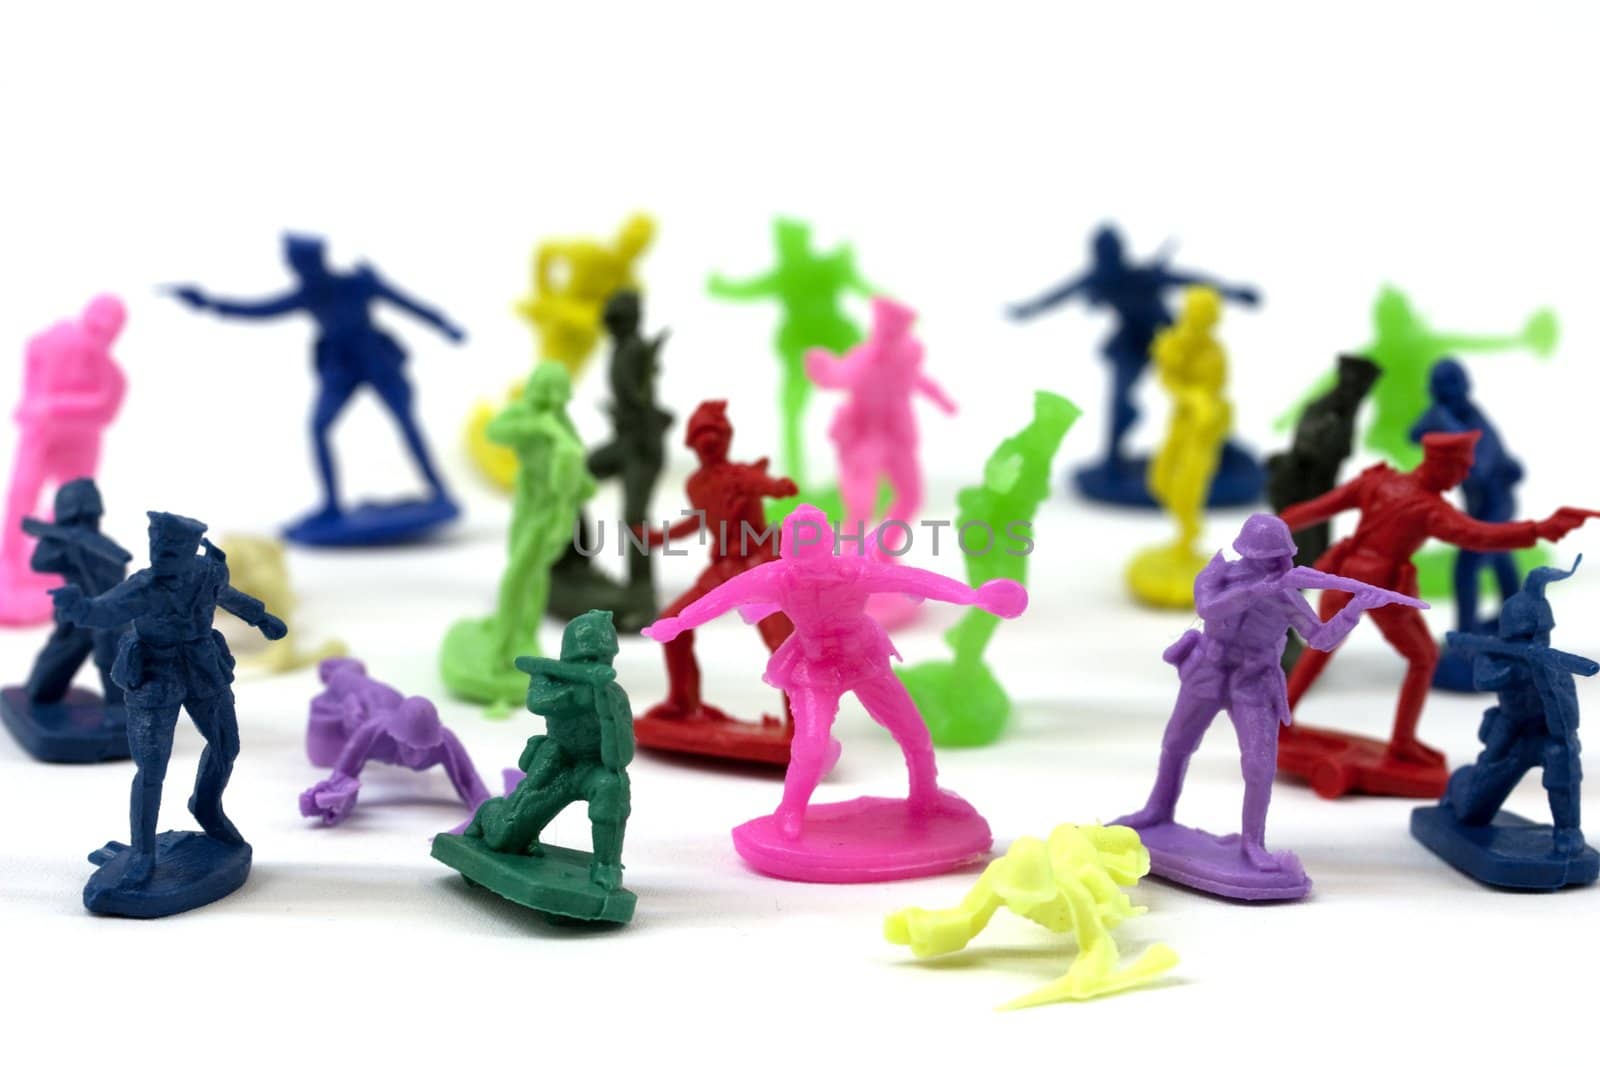 Plastic toy soldiers in many different colors